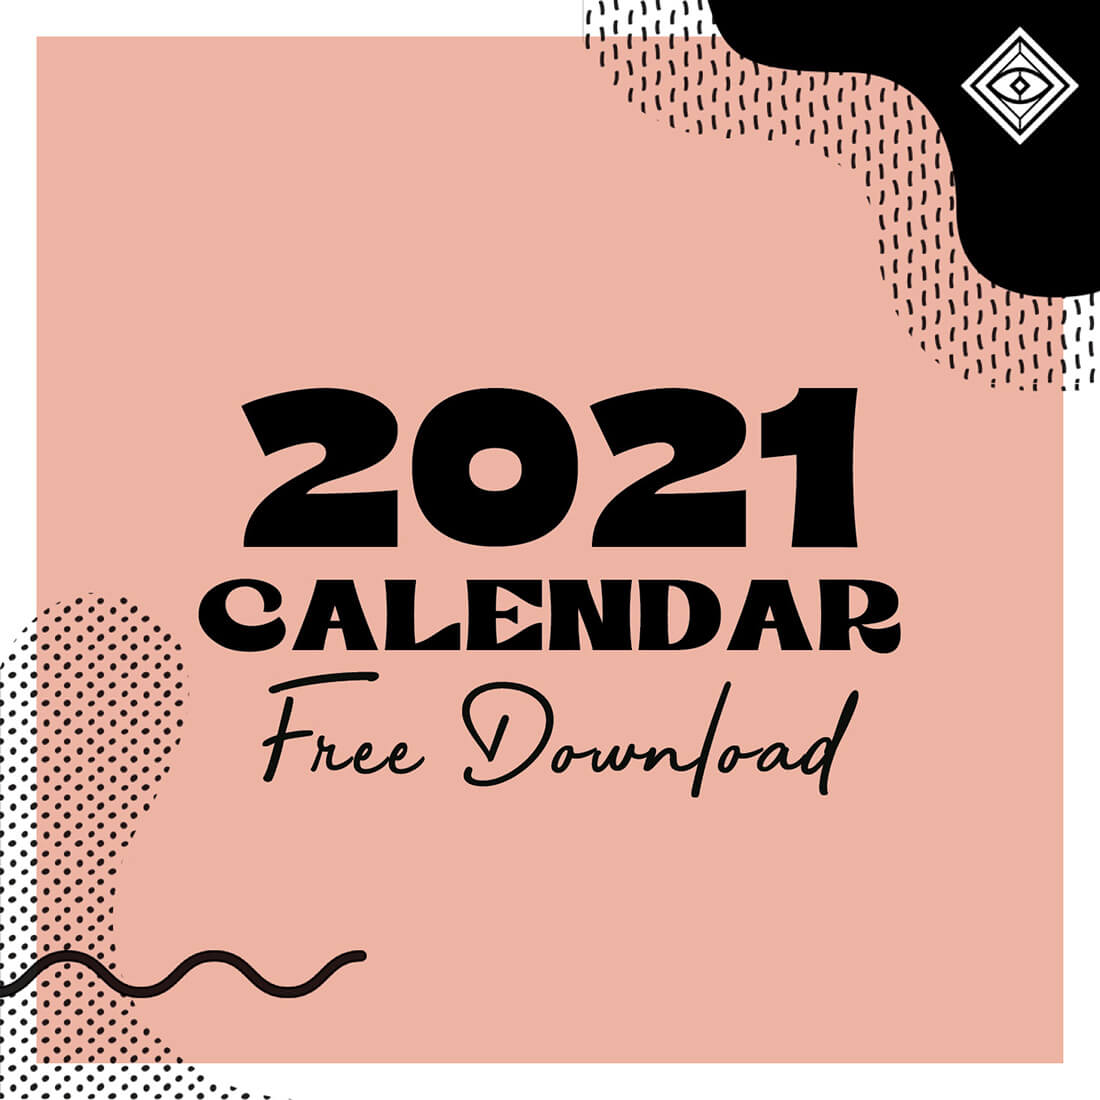 Little Gold Pixel • Free Printable 2021 Calendar • Download and print today!